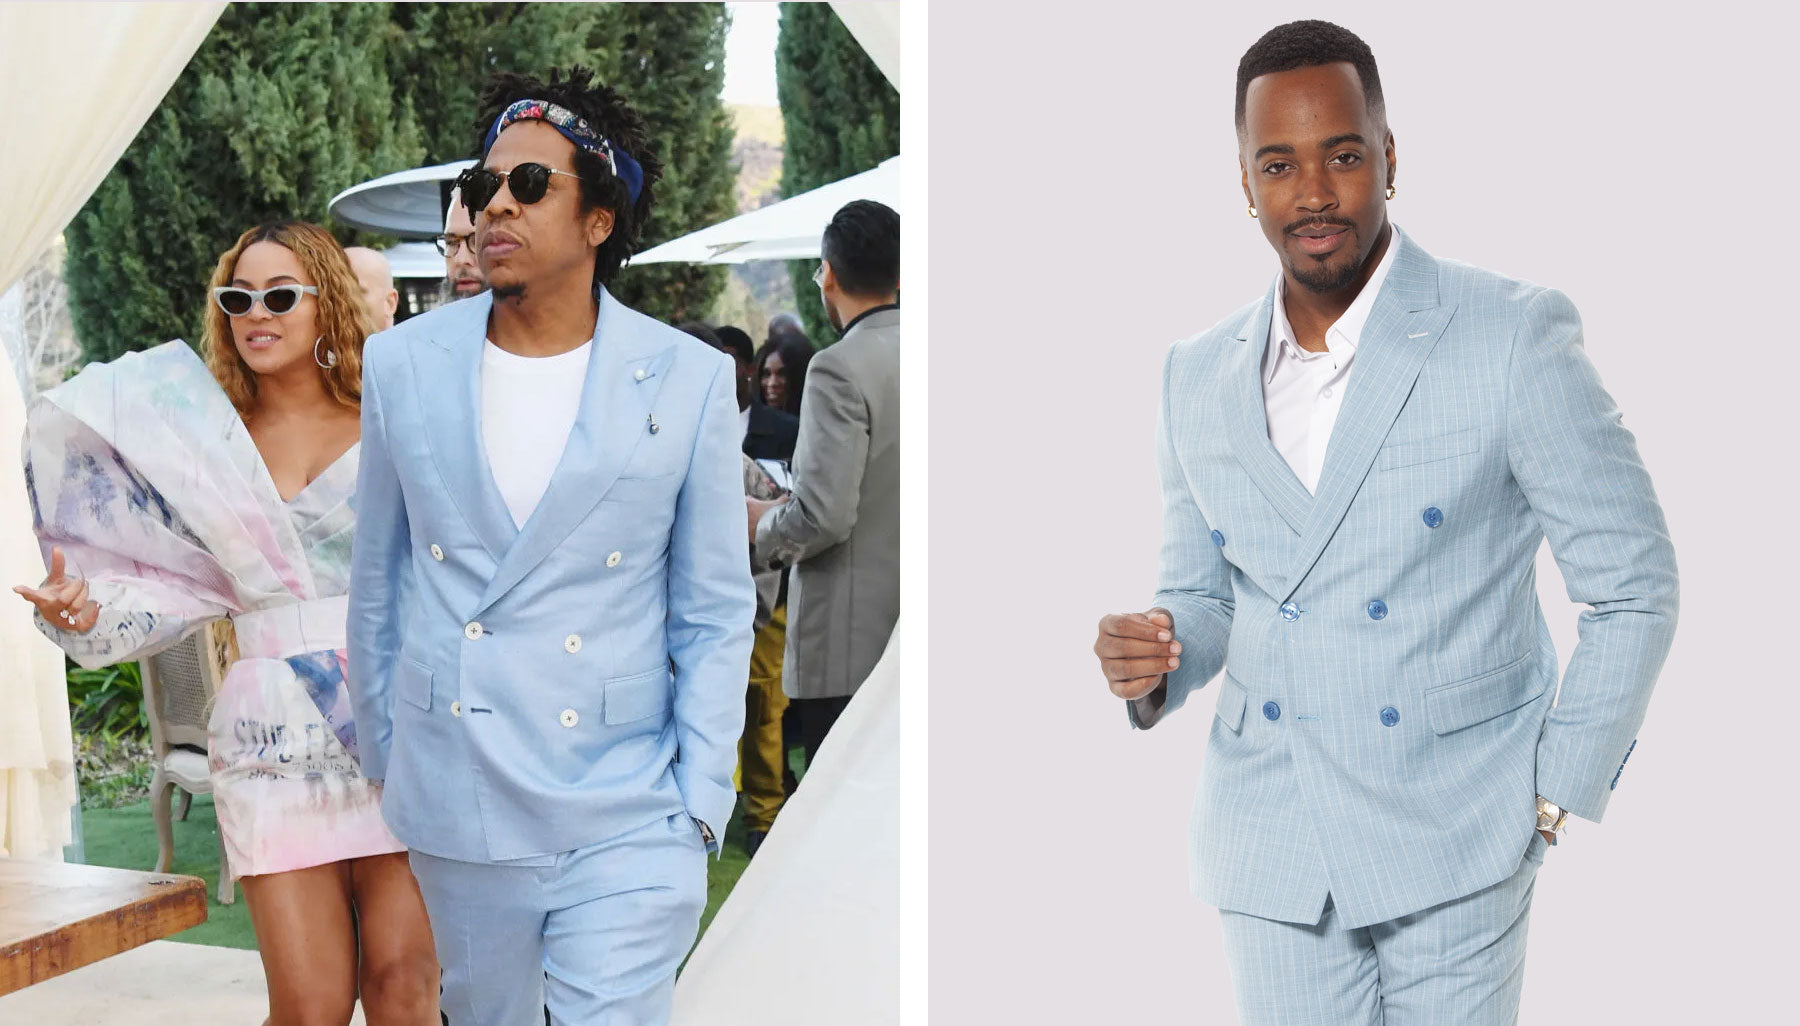 jay-z and beyonce, perfect tux style option for baby blue double breasted suit for summer wedding